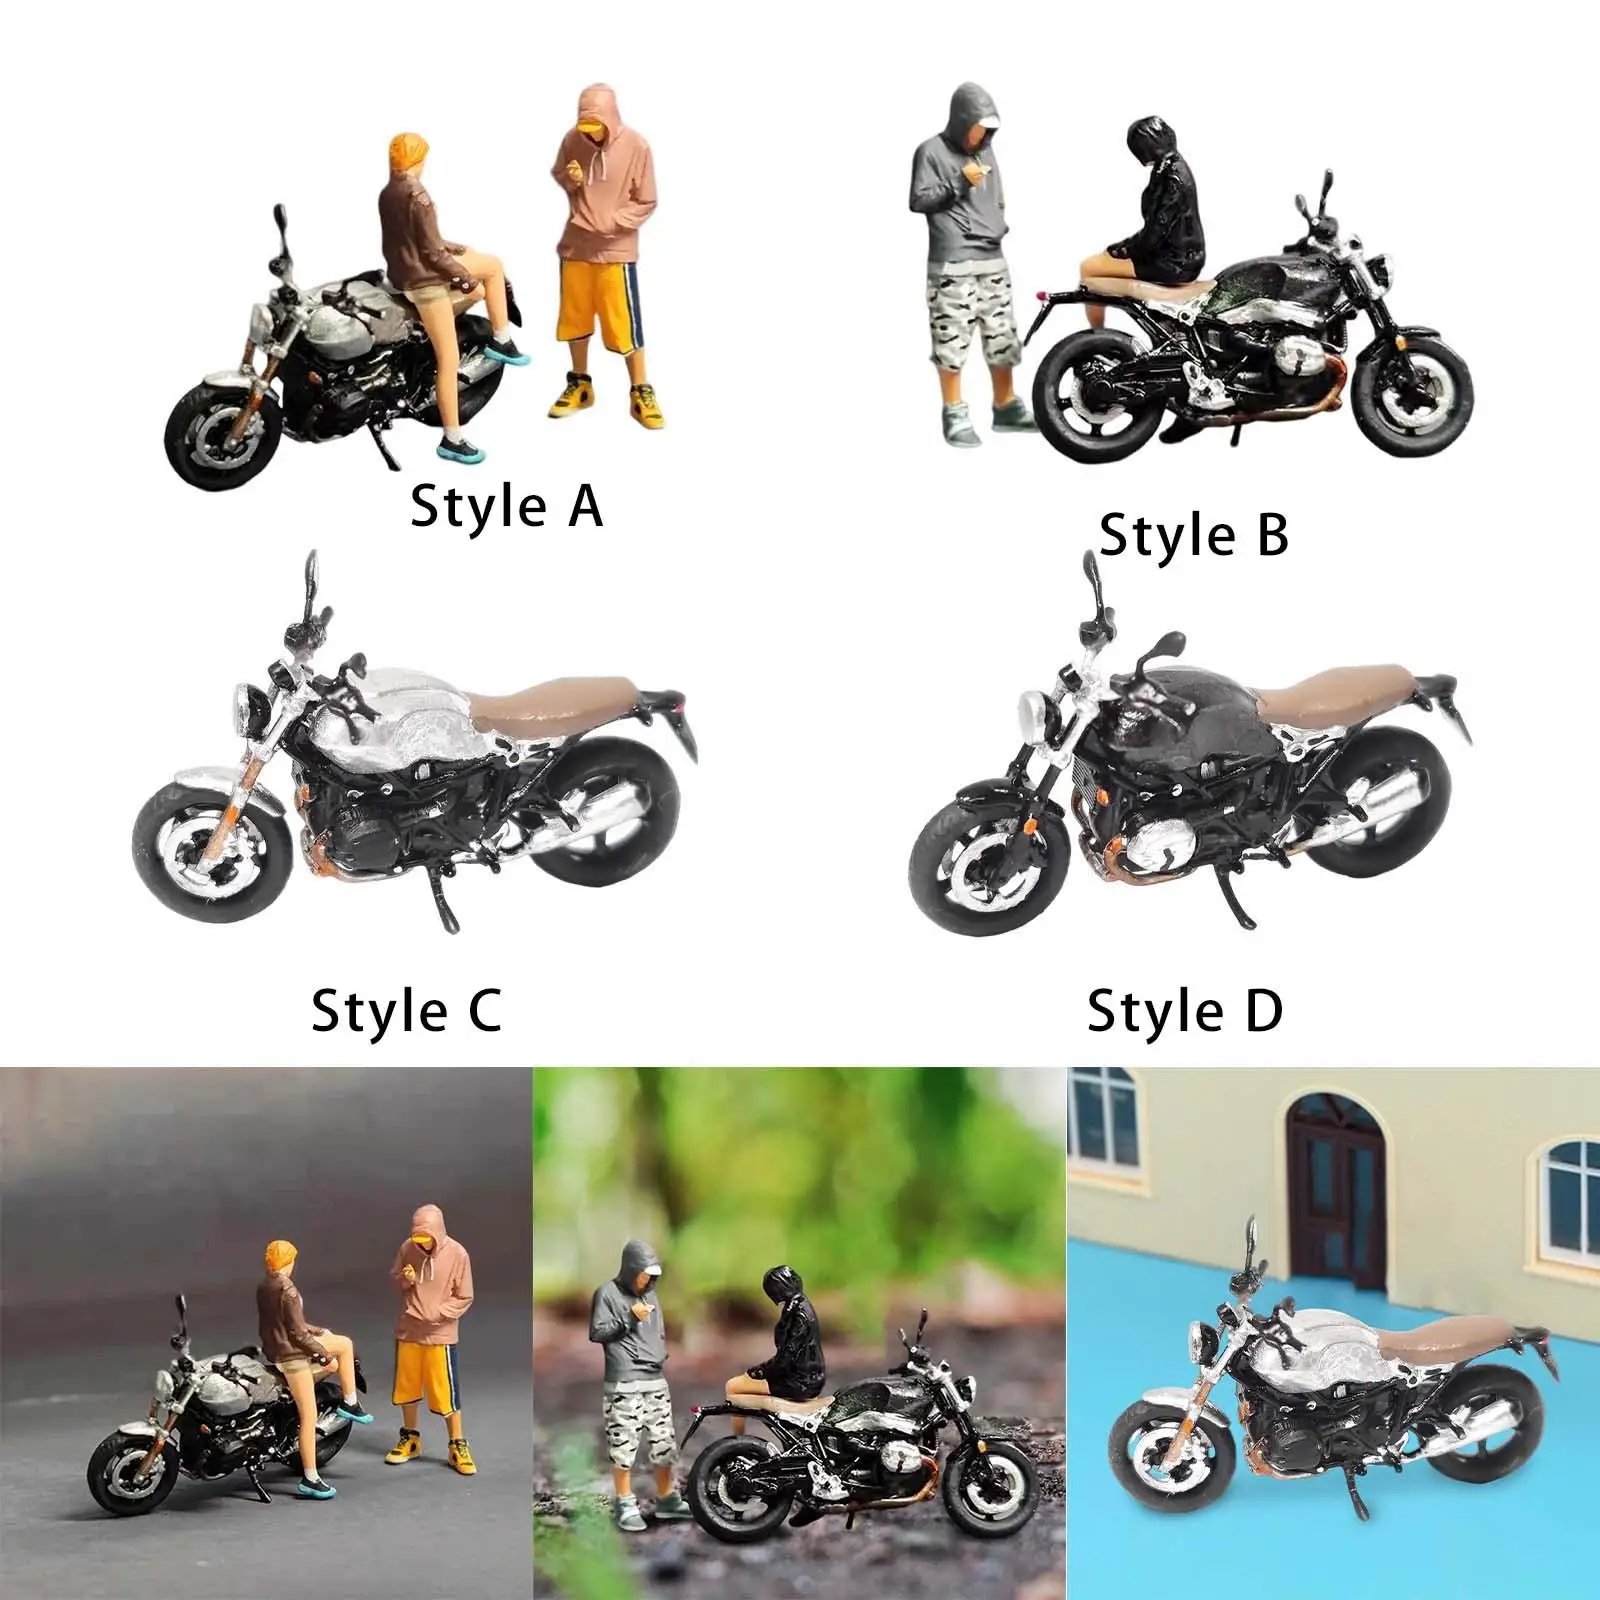 1/64 Figures Motorcycle Resin Doll Architecture Model Desktop Ornament Layout